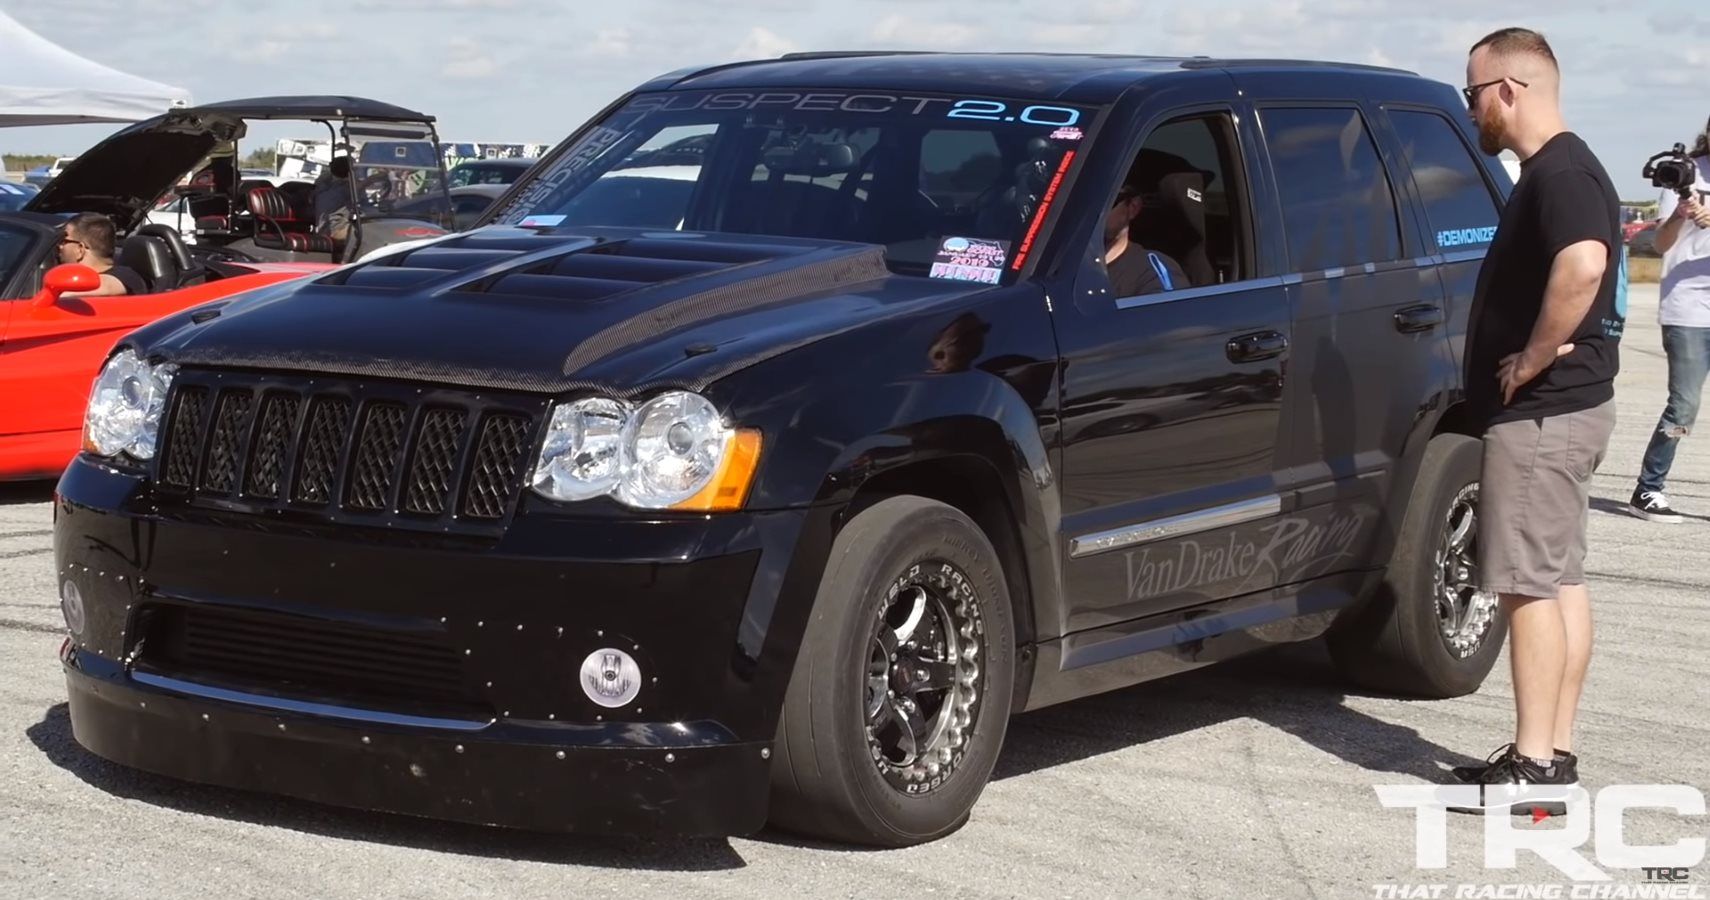 See The World's Fastest Jeep SRT8 With Over 1600 HP